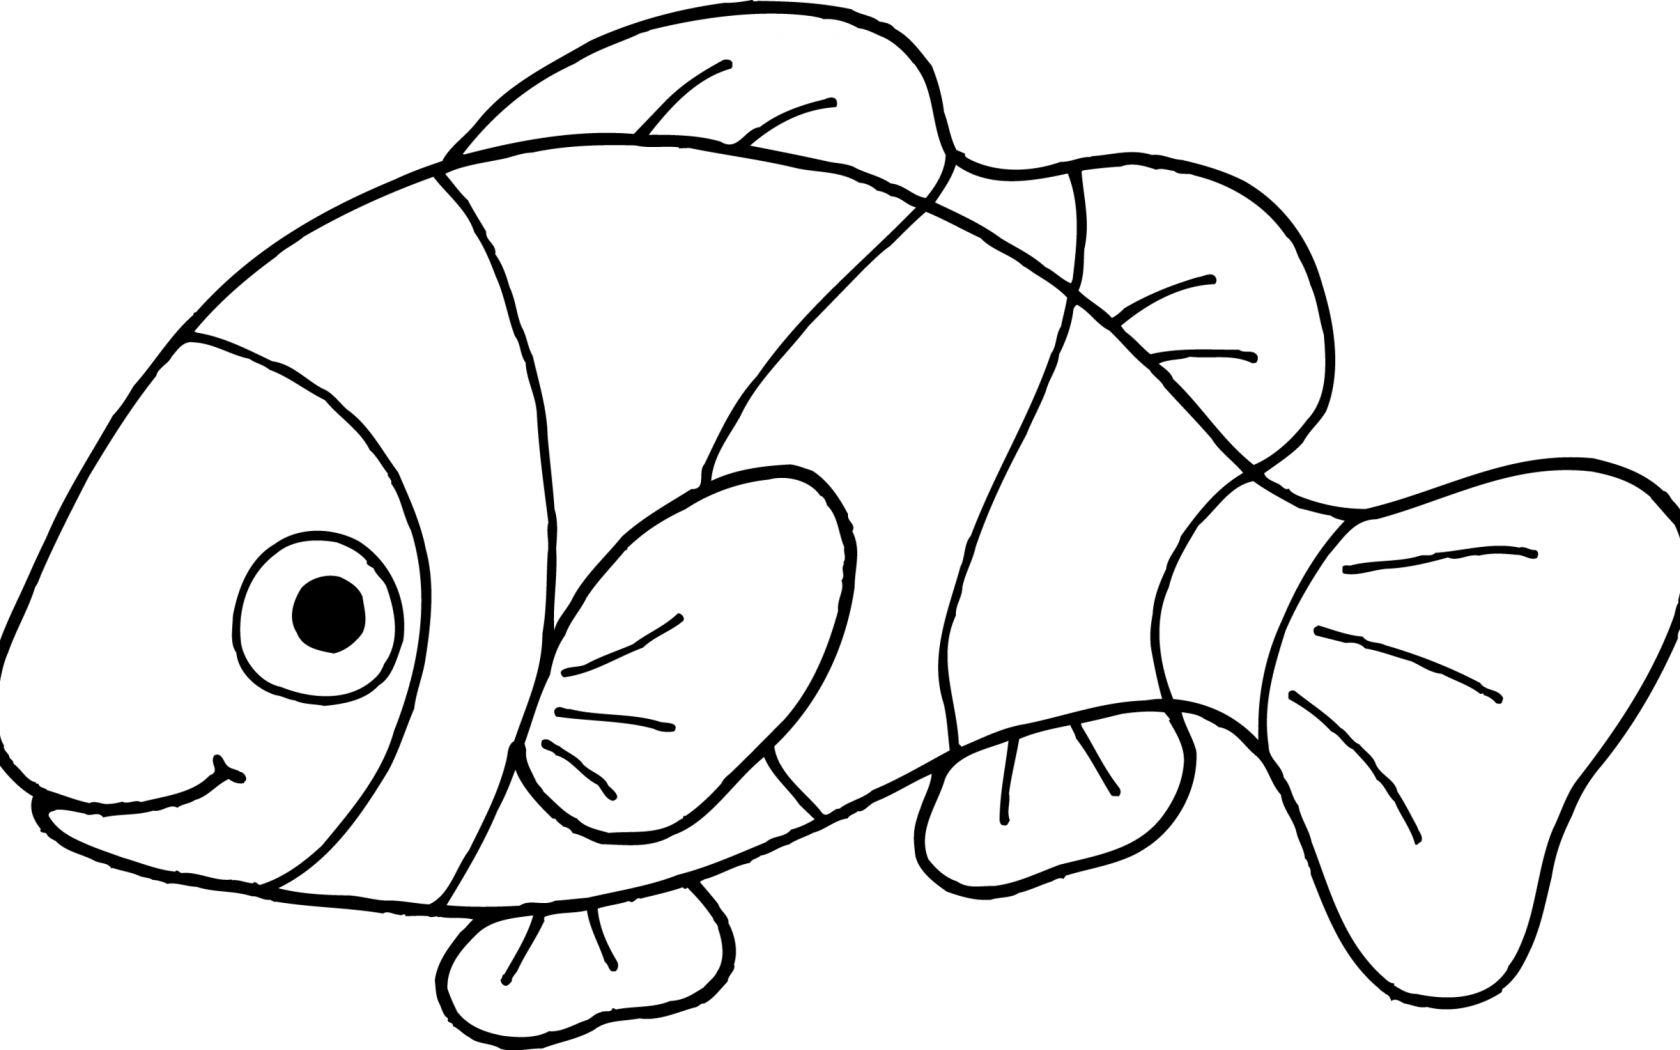 Clown Fish Coloring Page Free Printable Pages For Kids - Fish Black And White (1680x1050)